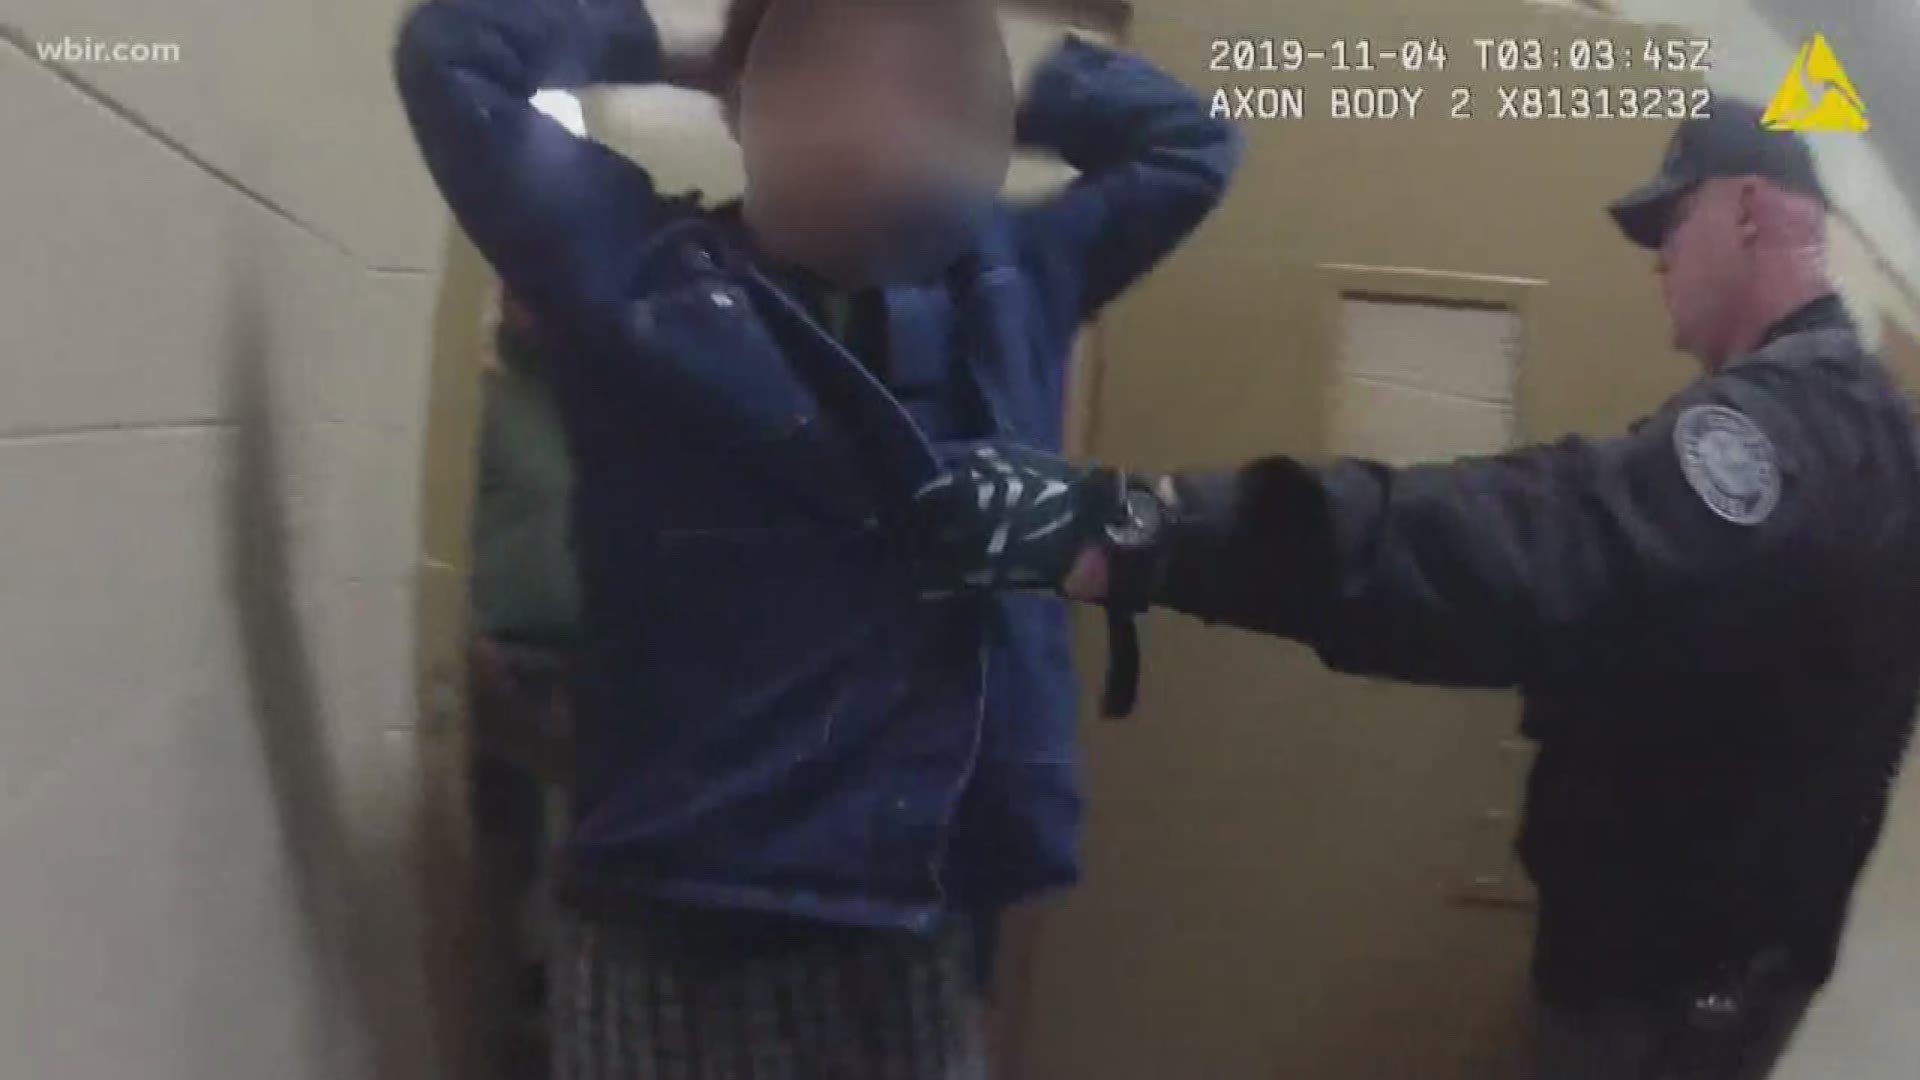 Officials tried to give juvenile inmates cheeseburgers to calm them down. Body camera video shows destruction at Mountain View facility when that didn’t work.